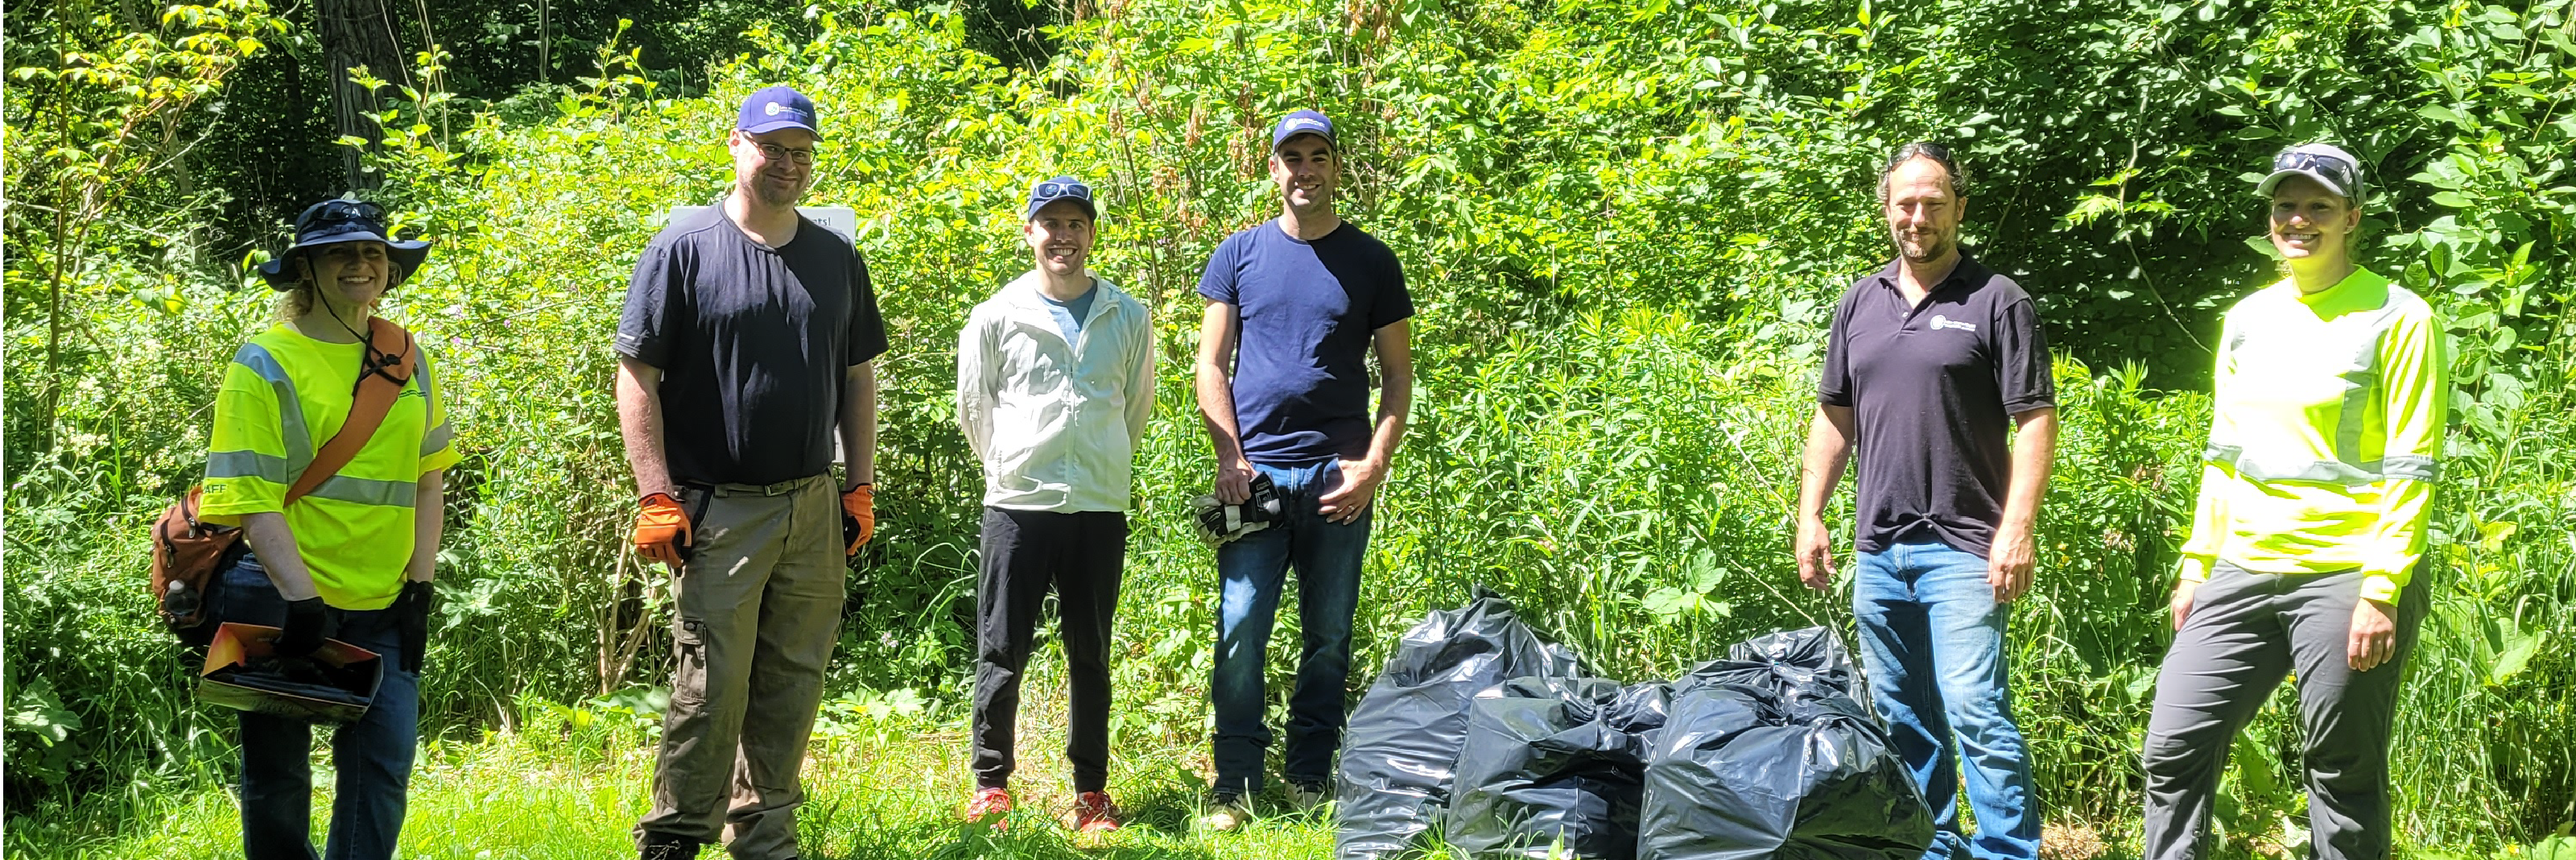 staff in the field with garbage bags full of invasive species